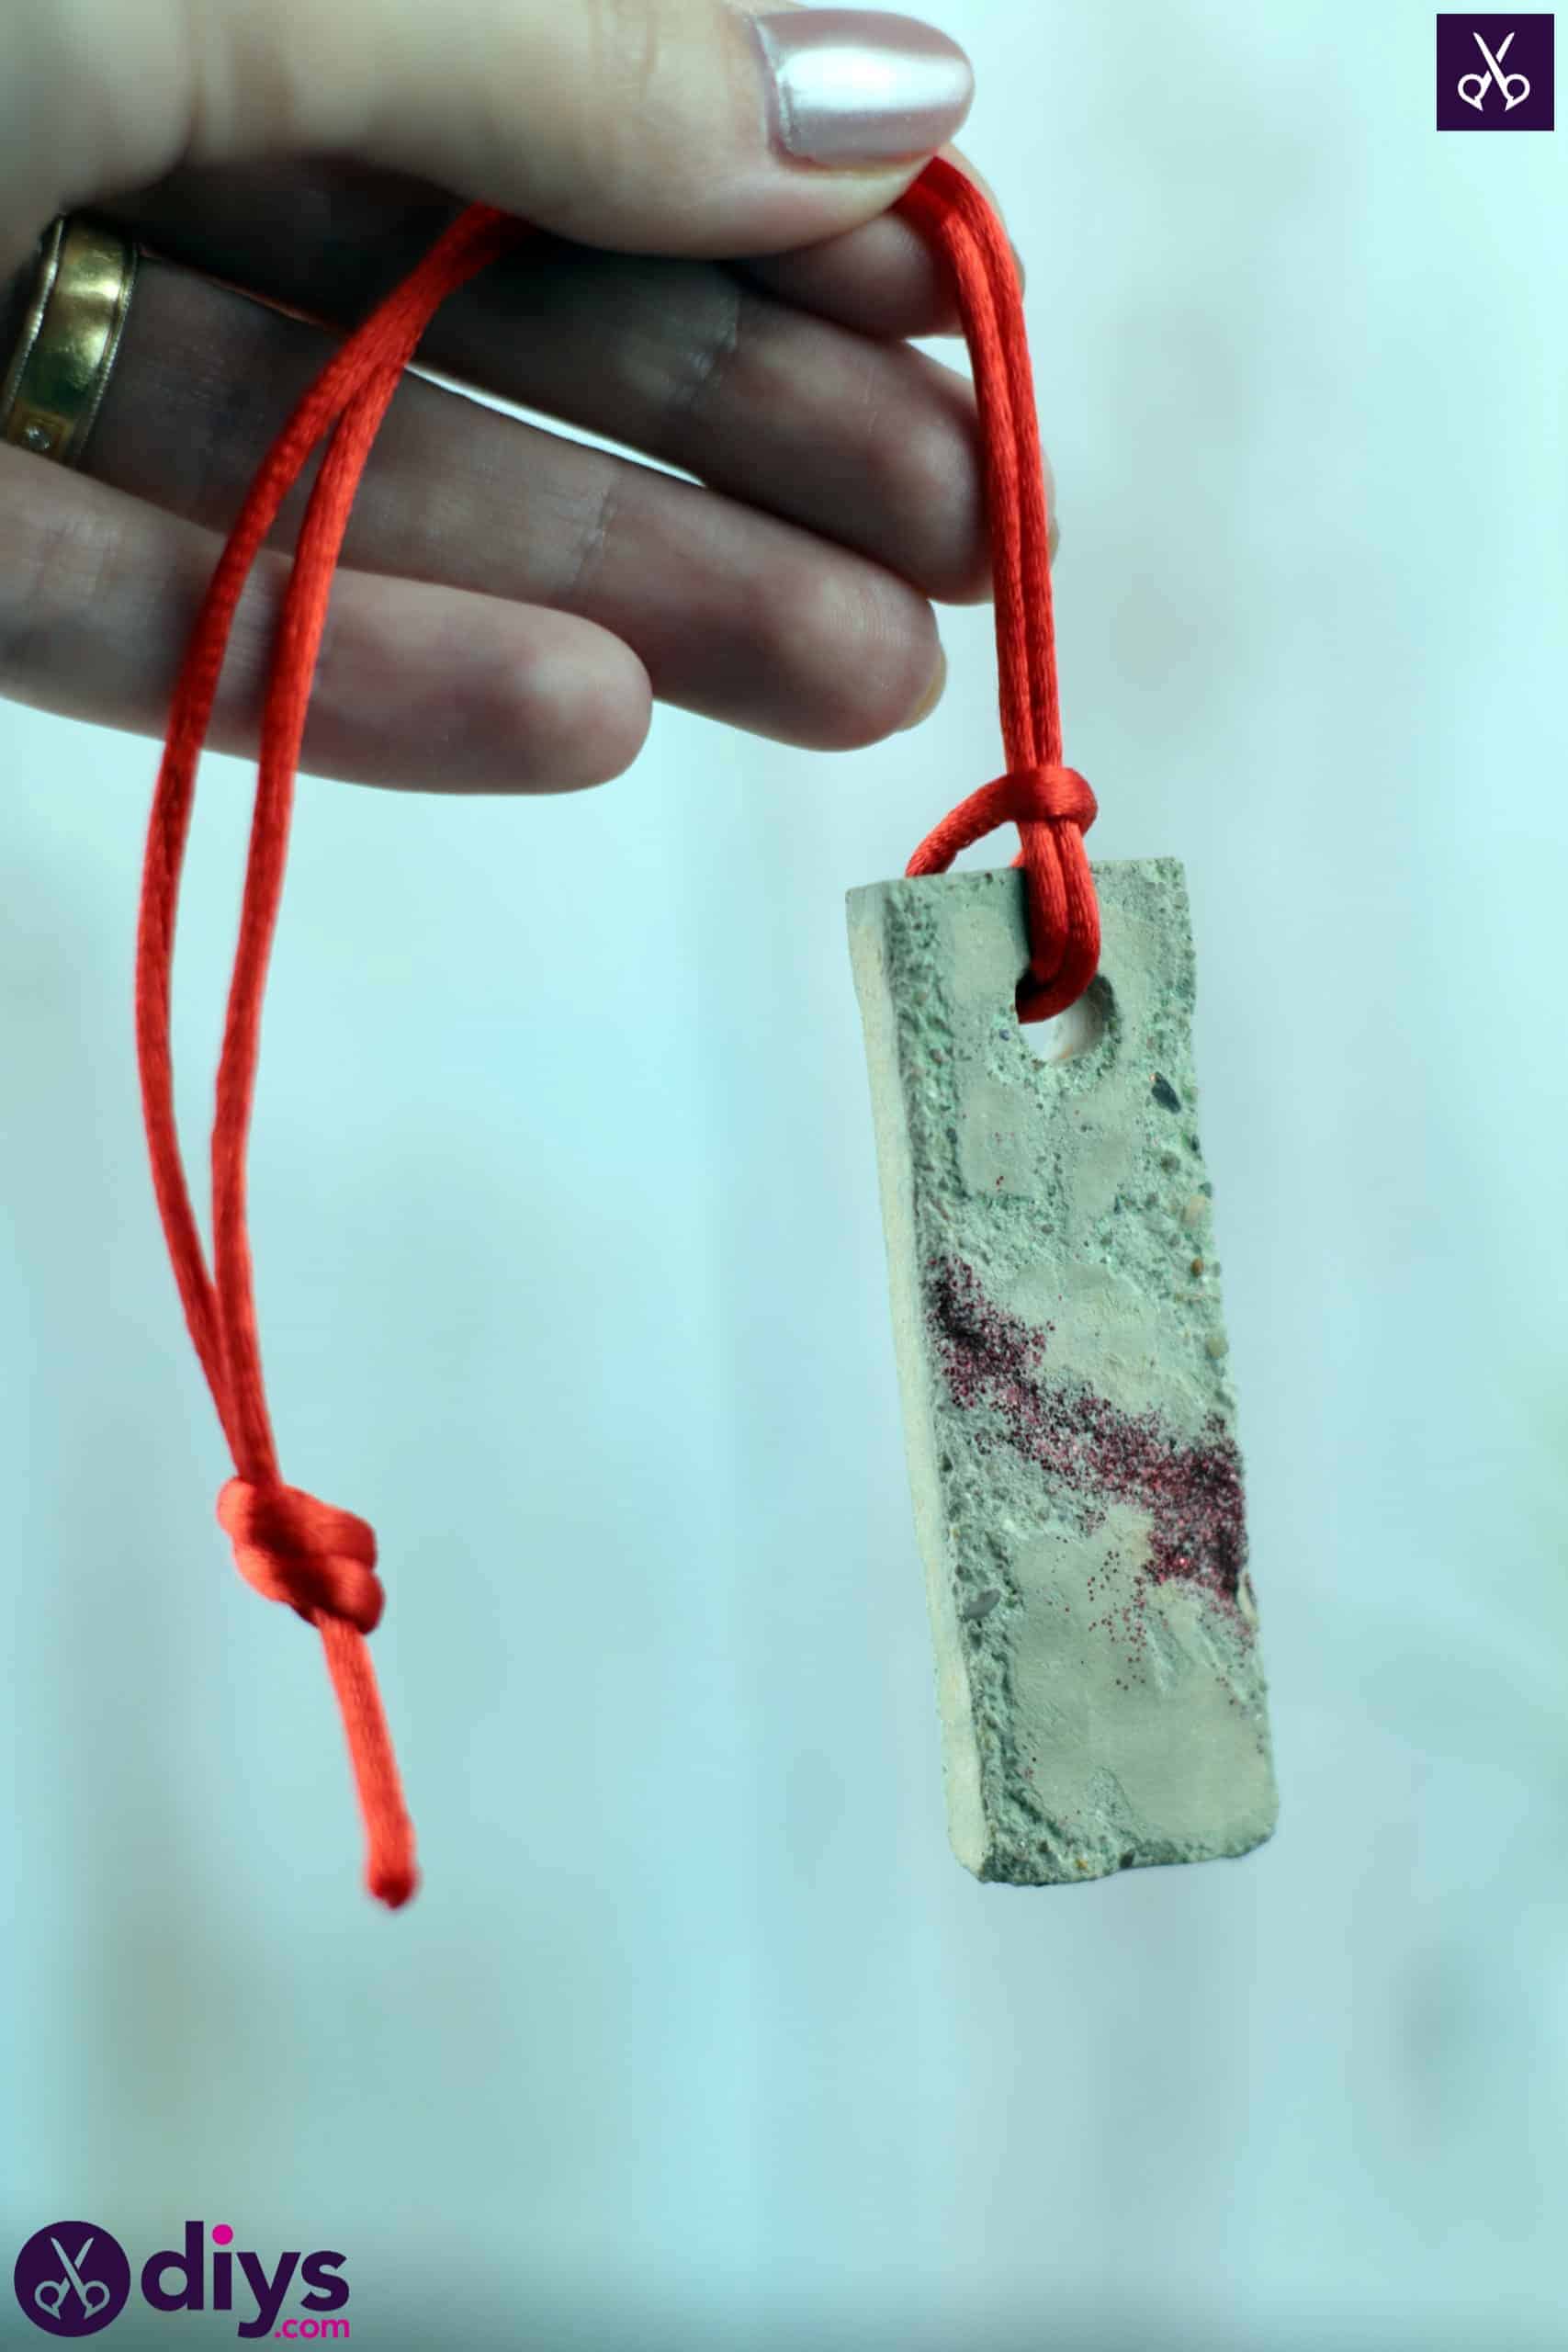 Diy concrete necklace with glitter red string